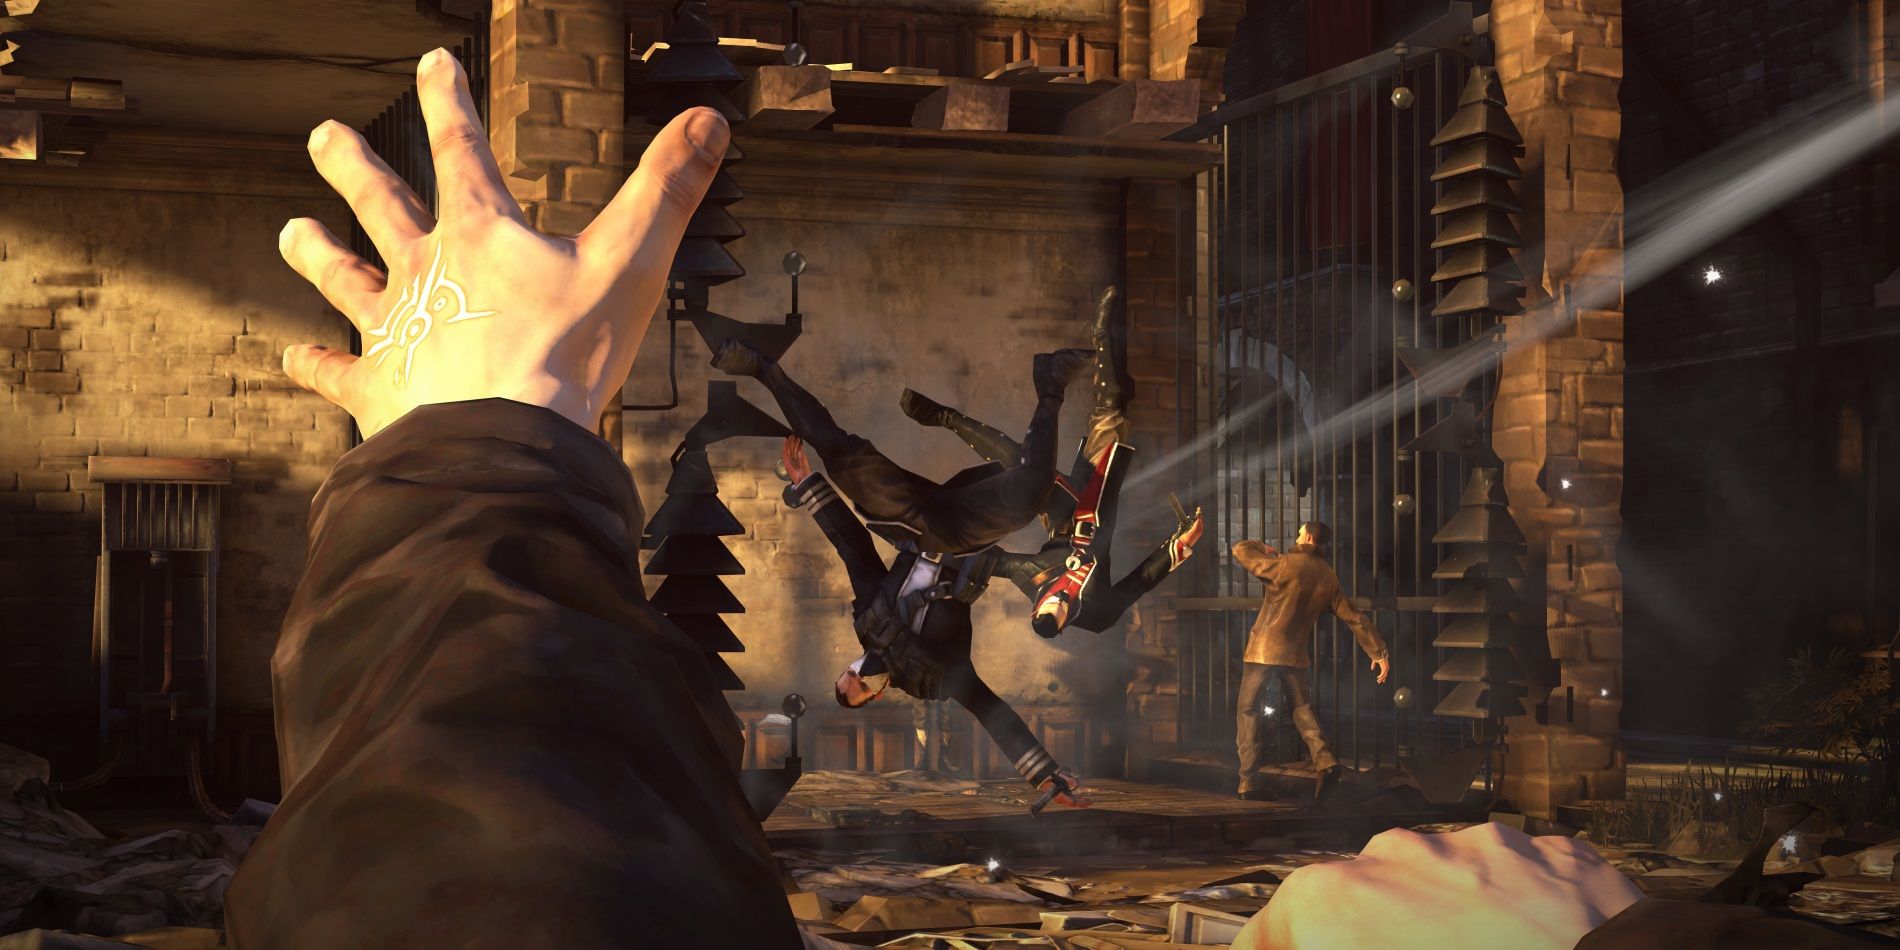 Dishonored, Corvo using the Outsider's wind blast power to blow away guards